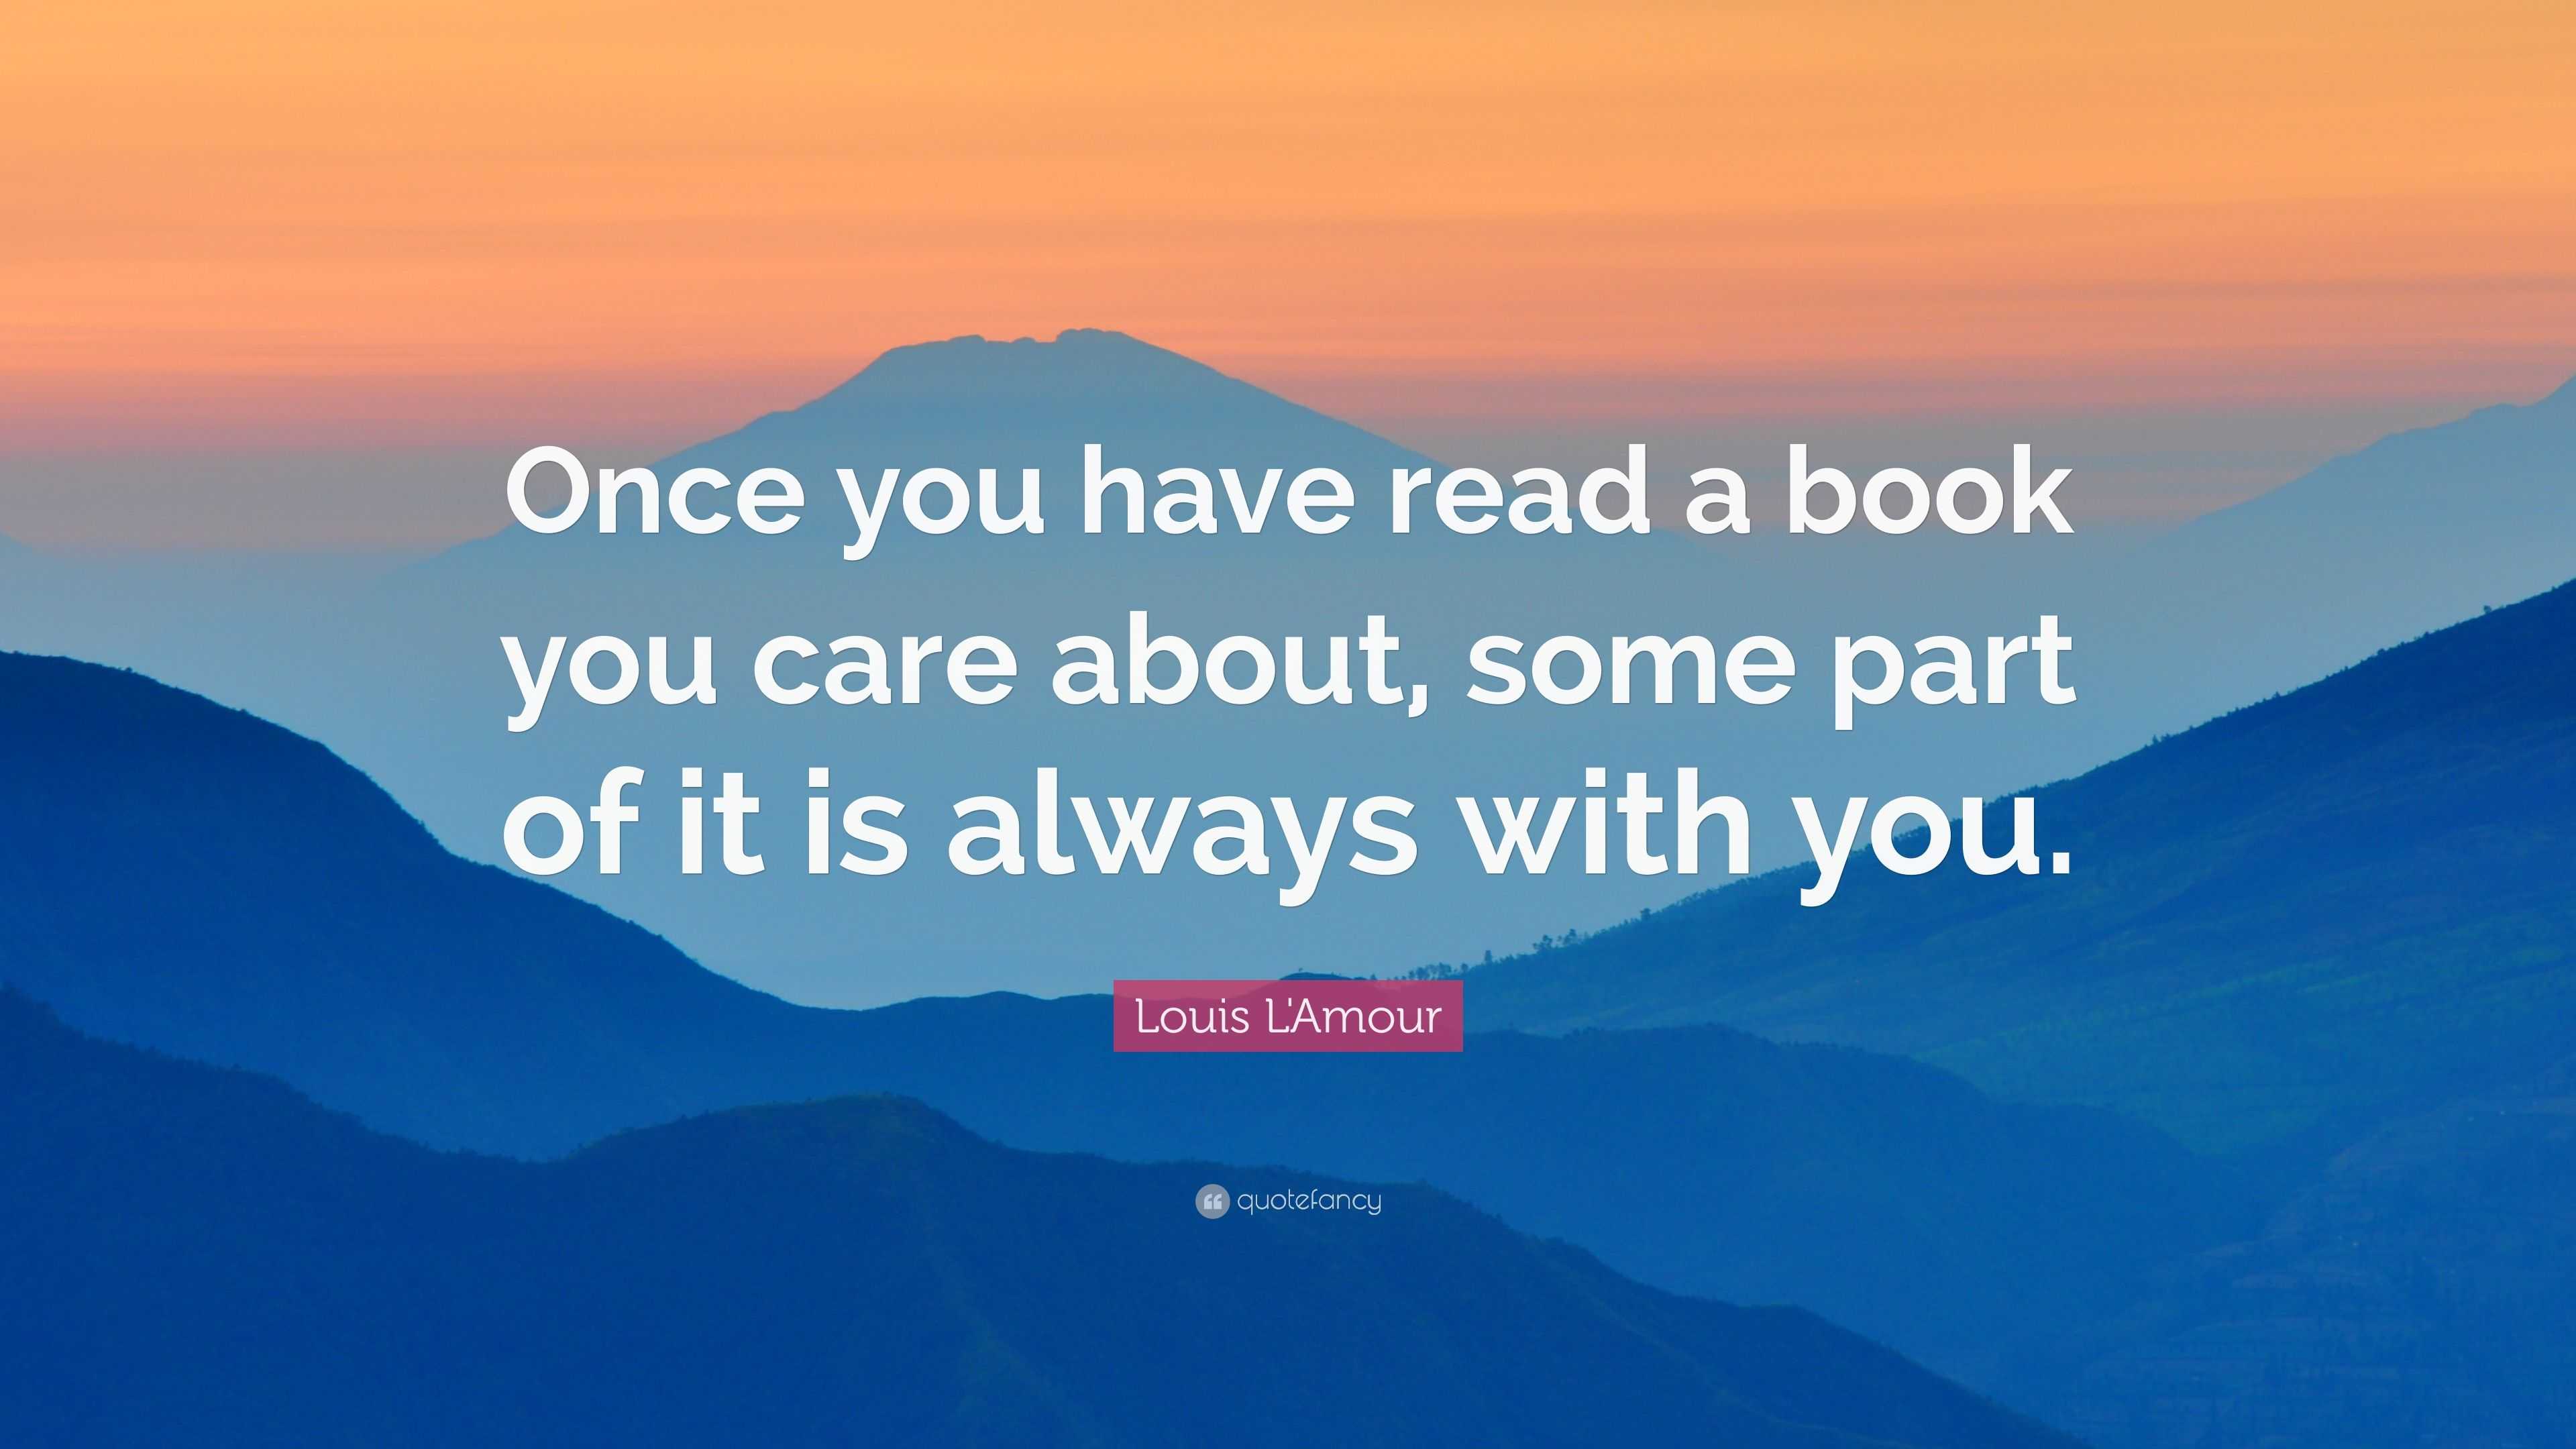 Louis L'Amour Quote: “Once you have read a book you care about, some ...